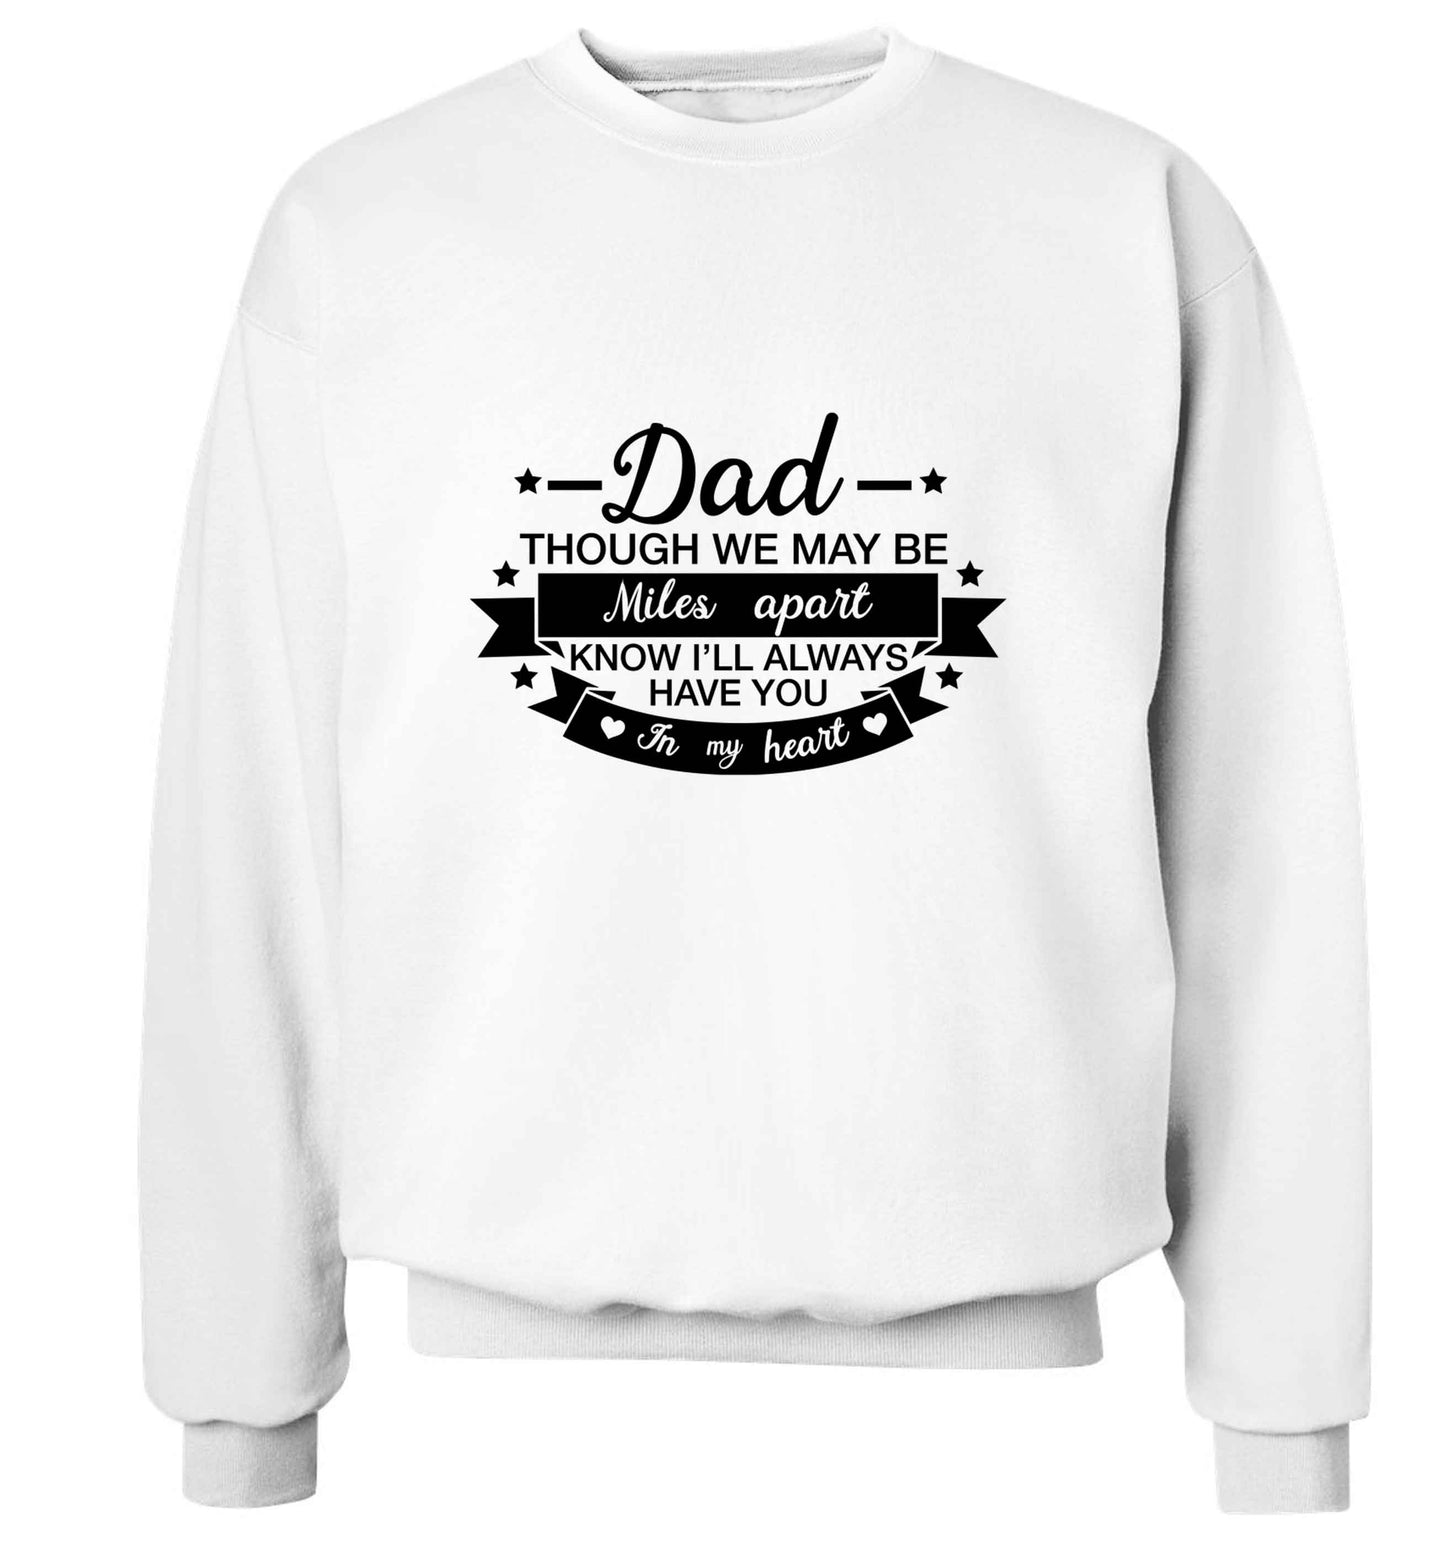 Dad though we are miles apart know I'll always have you in my heart adult's unisex white sweater 2XL